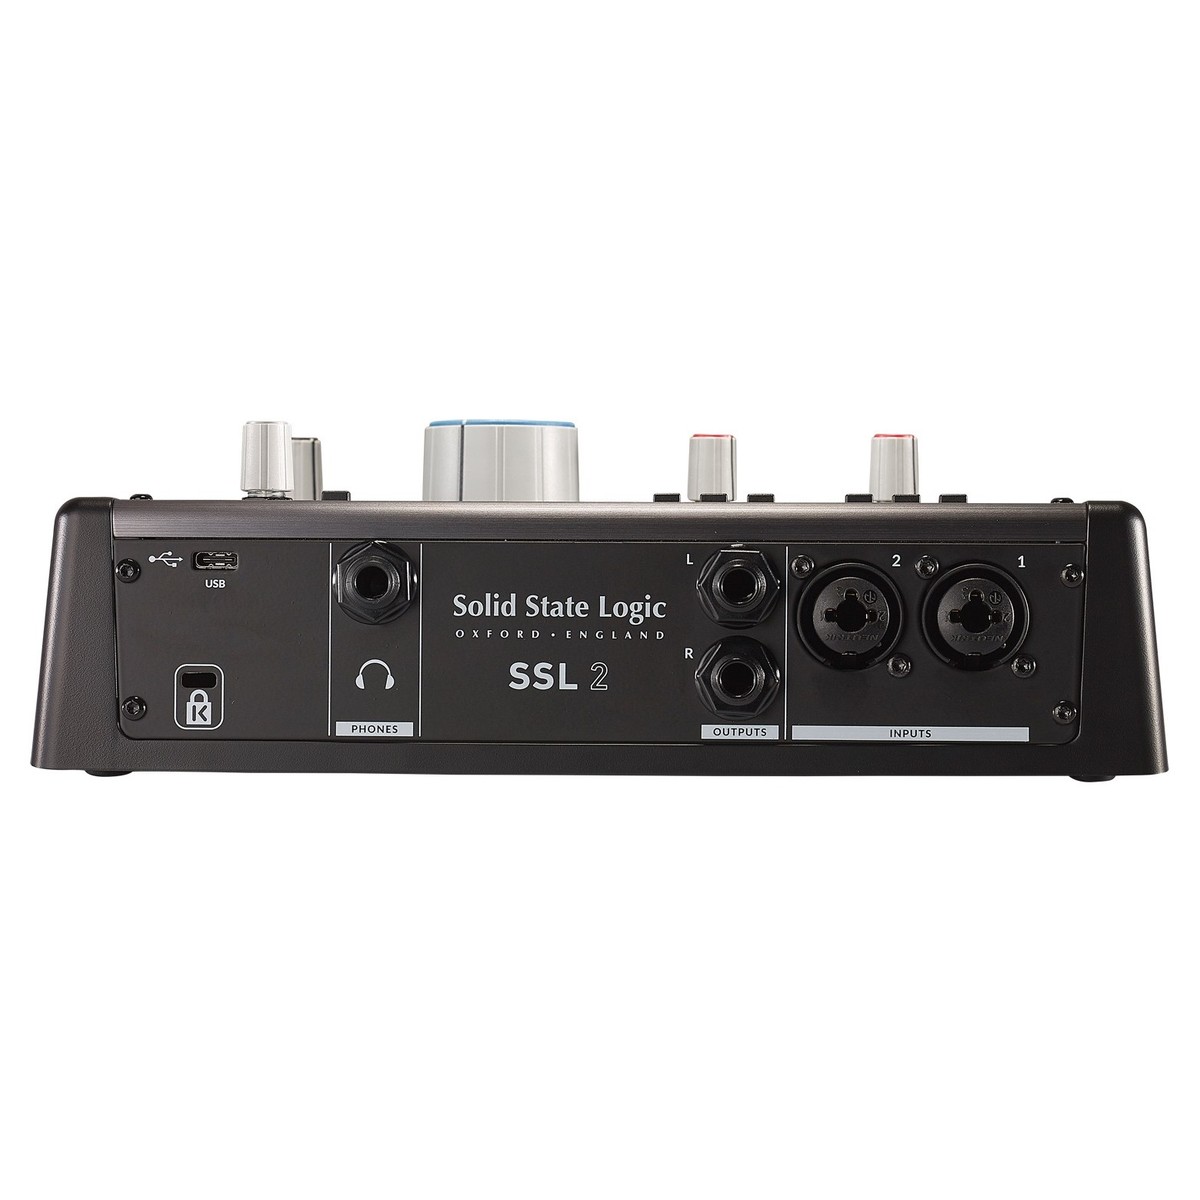 SOLID STATE LOGIC SSL2 AUDIO INTERFACE INTERFACCIA AUDIO USB 2 IN 2 OUT 1